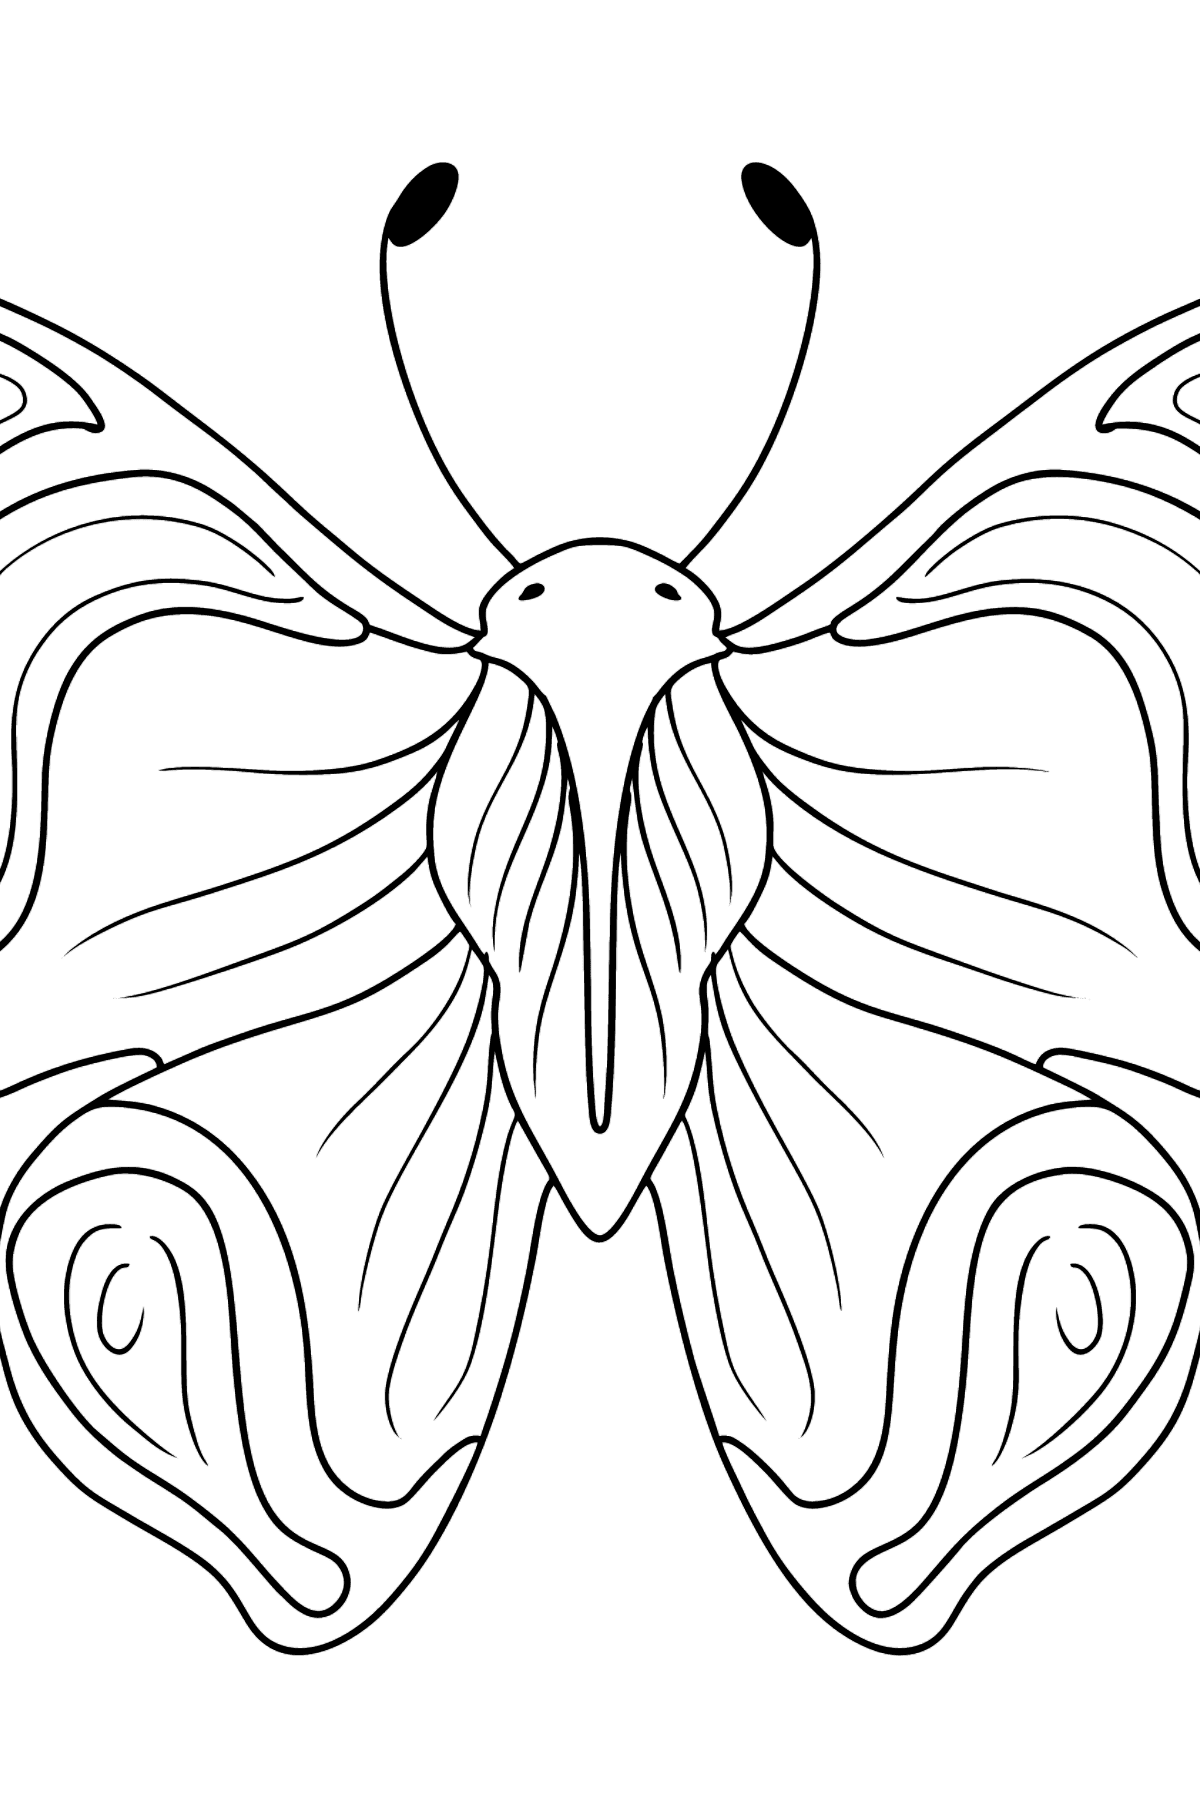 Admiral Butterfly coloring page - Coloring Pages for Kids